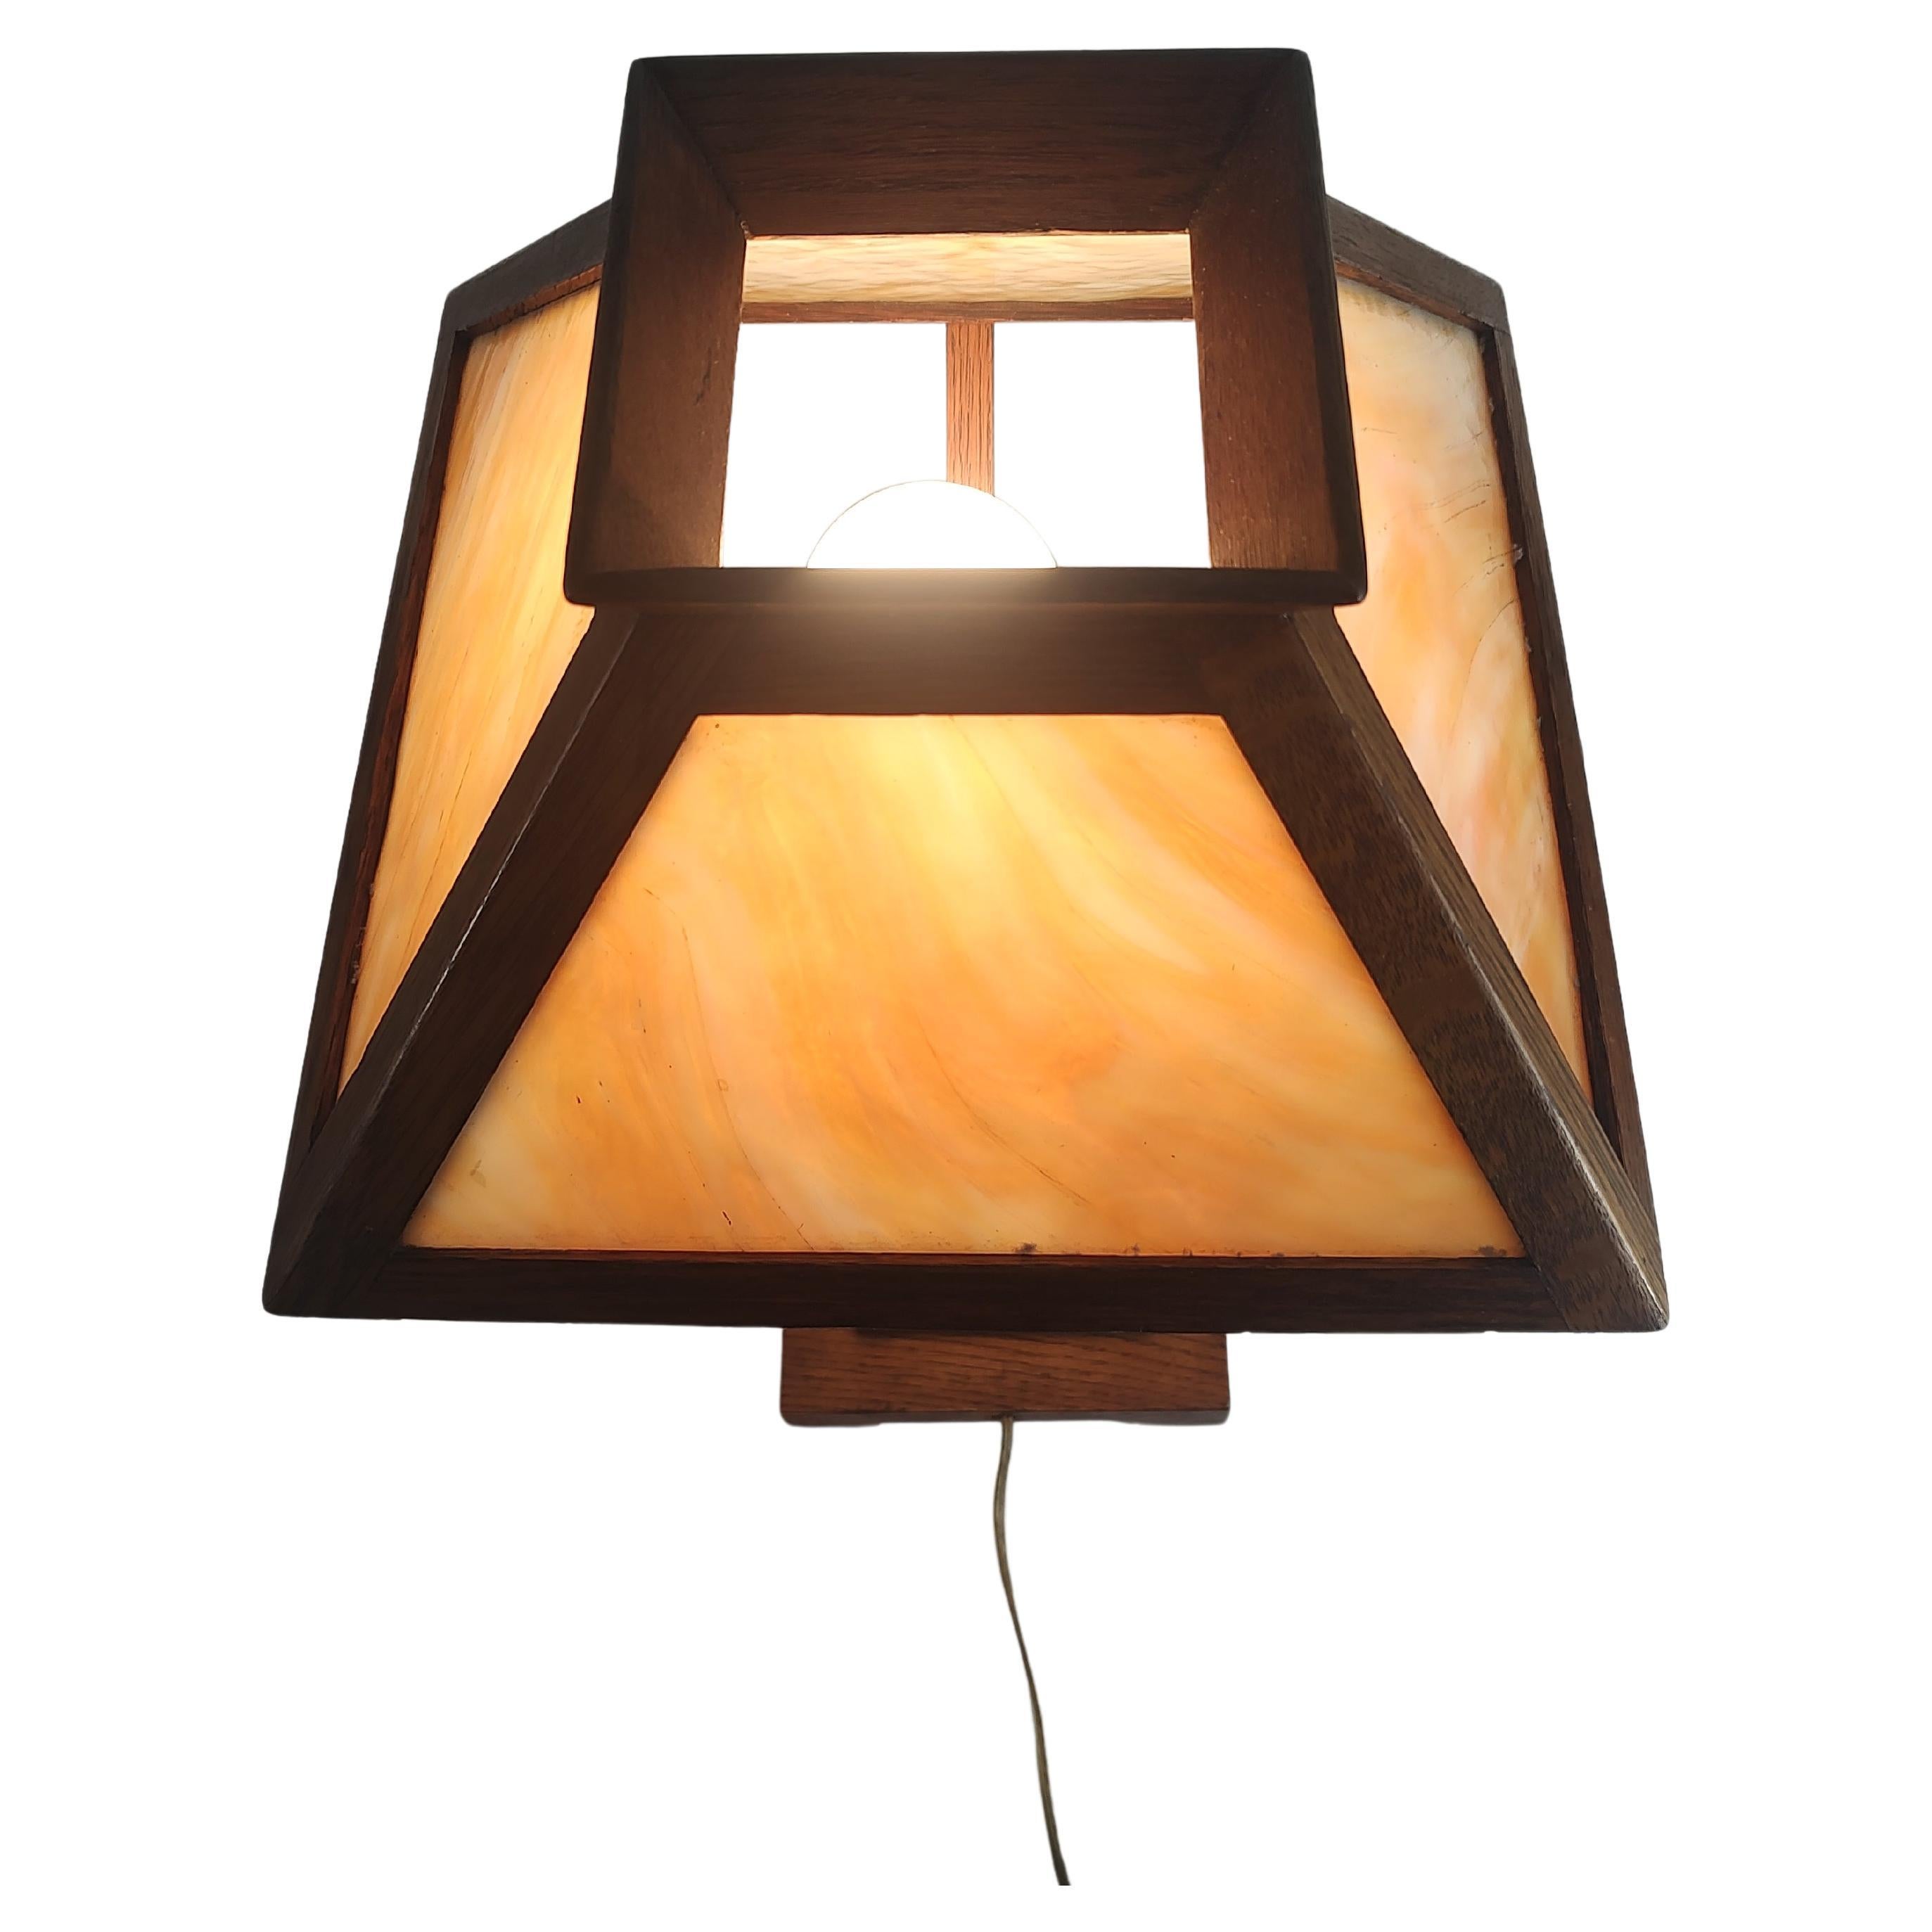 American Arts & Crafts Mission Oak with Carmel Colored Slag Glass Table Lamp C 1910 For Sale